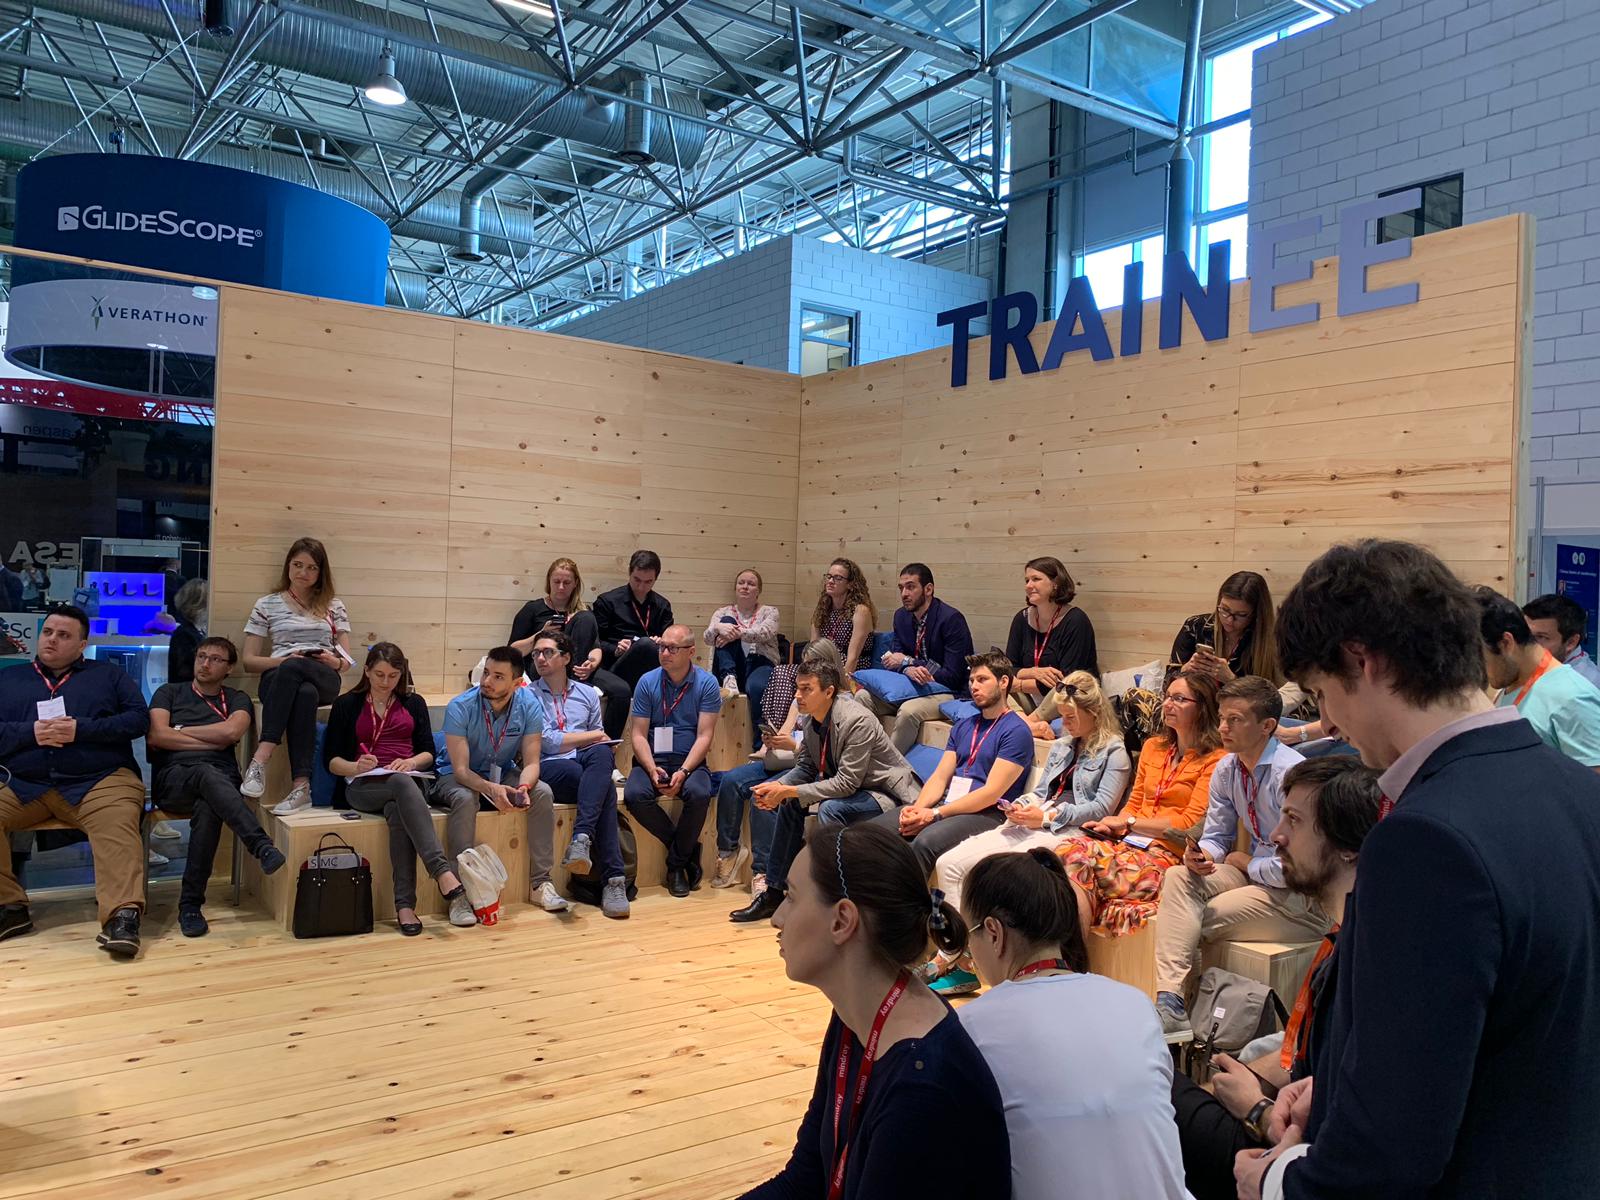 Euroanaesthesia 2019 - ESA Trainee Network booth session